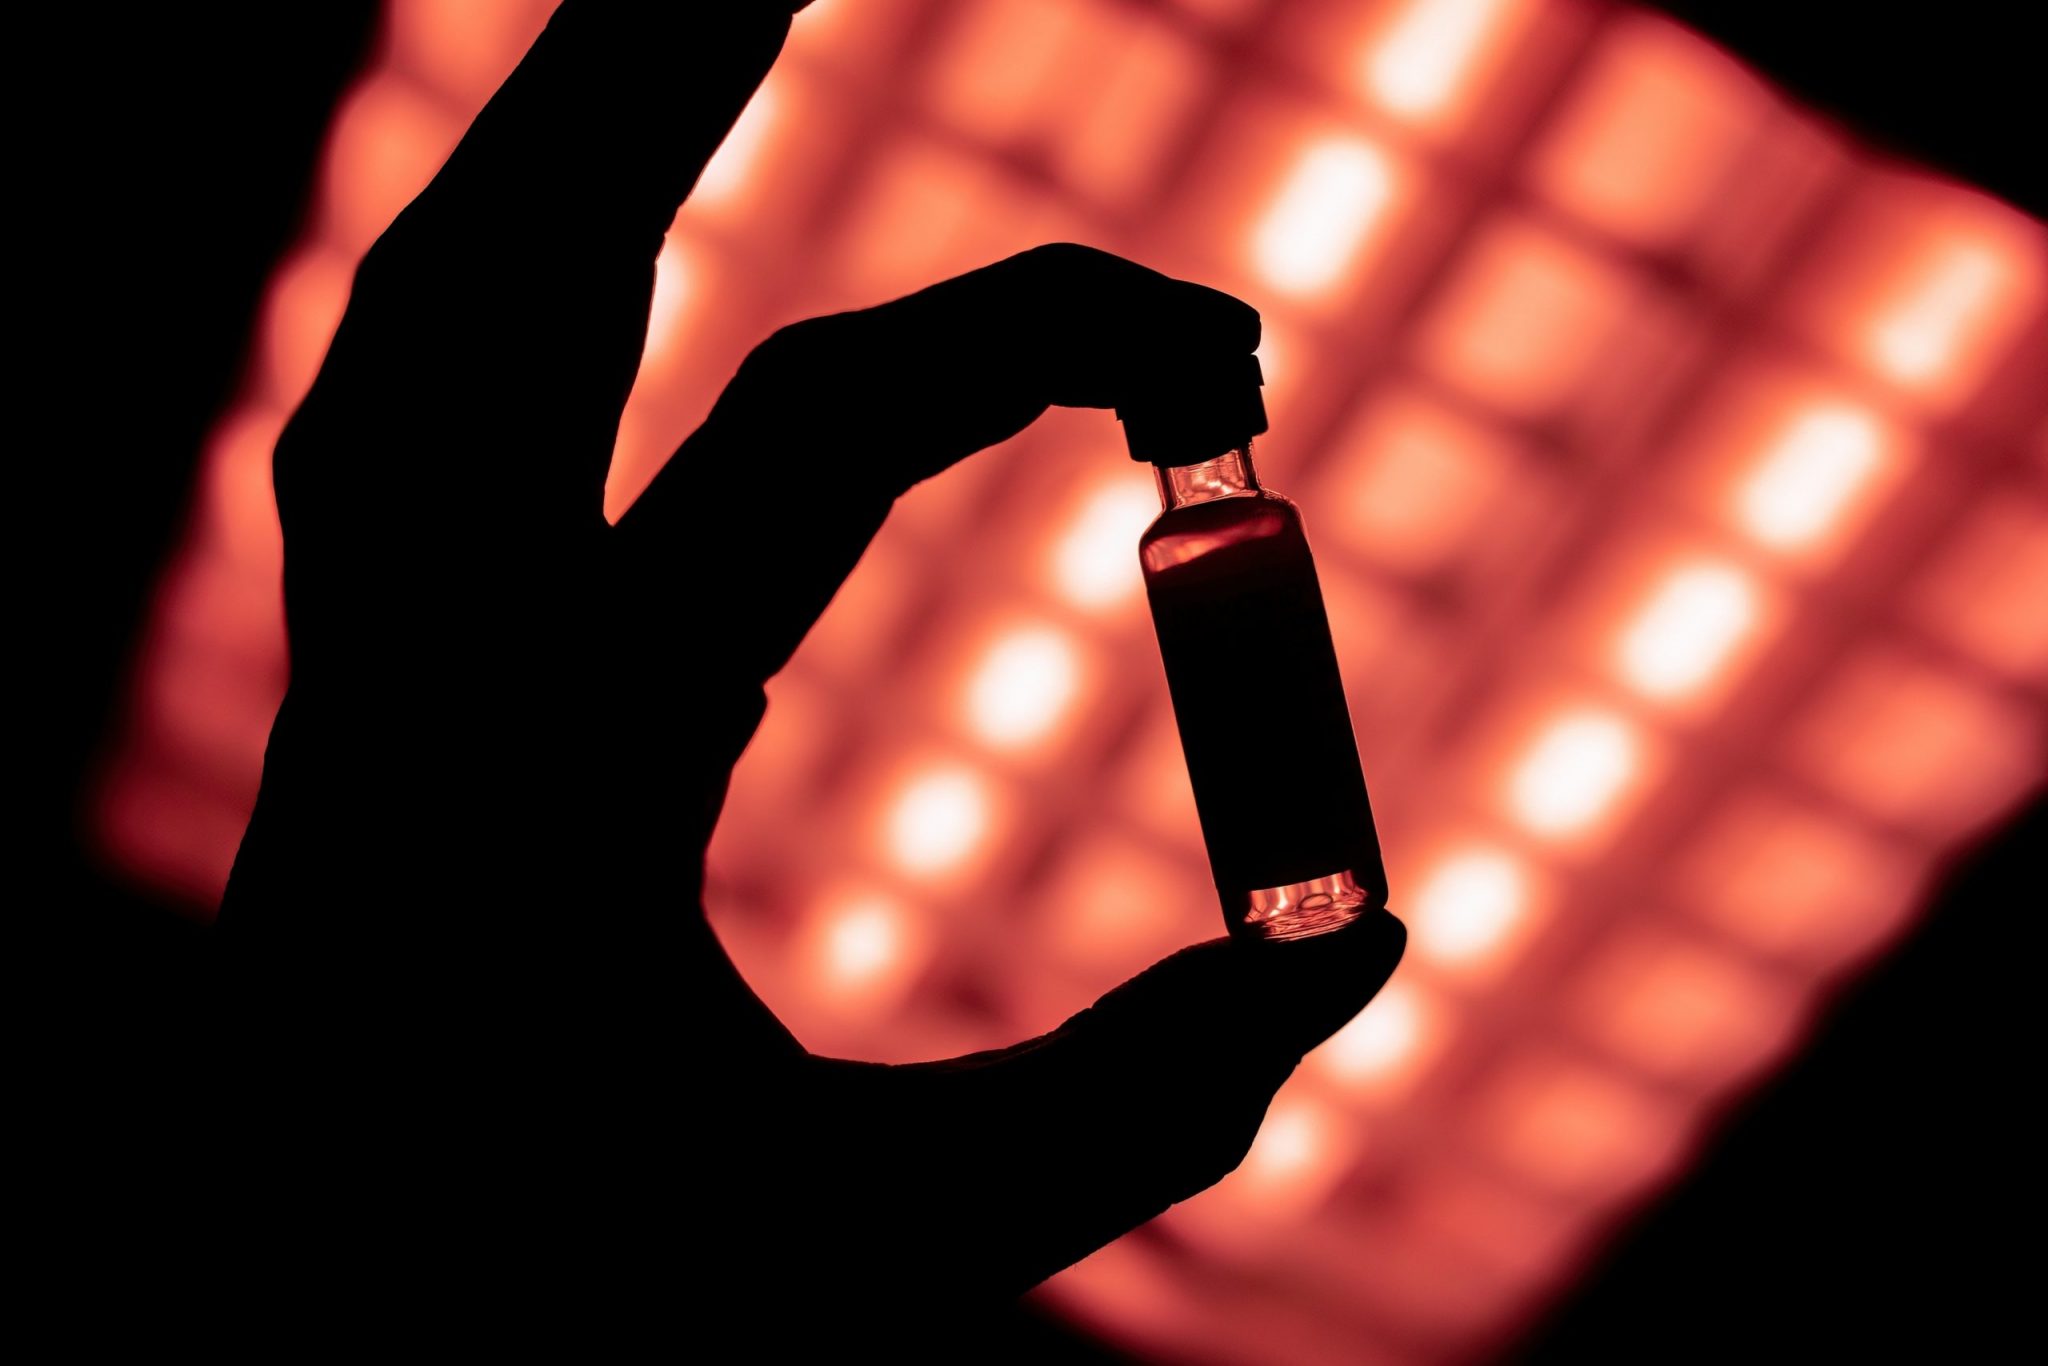 vaccine vial held against red light, showing its black silhouette